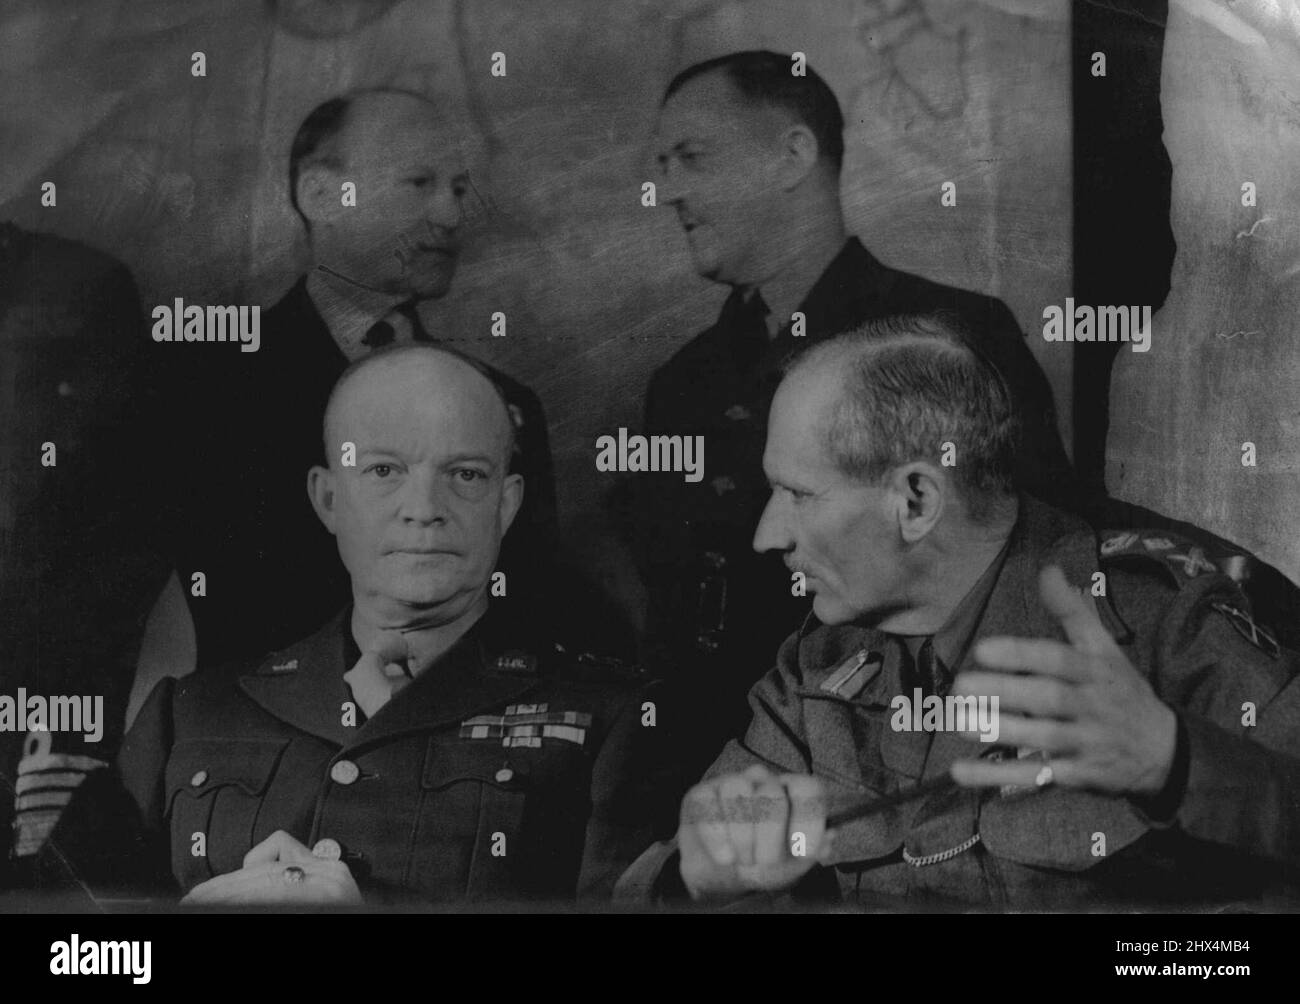 Allied Supreme Command In Conference - First Pictures -- General Dwight D. Eisenhower, Supreme Commander, listens while General Sir Bernard Montgomery, C-in-C., British Group of Armies, makes a point at the conference. Behind are Admiral Sir Bertram Ramsay, Allied Naval Commander (left) and Air Chief Marshall Sir Trafford Leigh Mallory, Air C.-in-C. For the first time the Allied Supreme Command were photographed in conference at their headquarters. February 1, 1944. Stock Photo